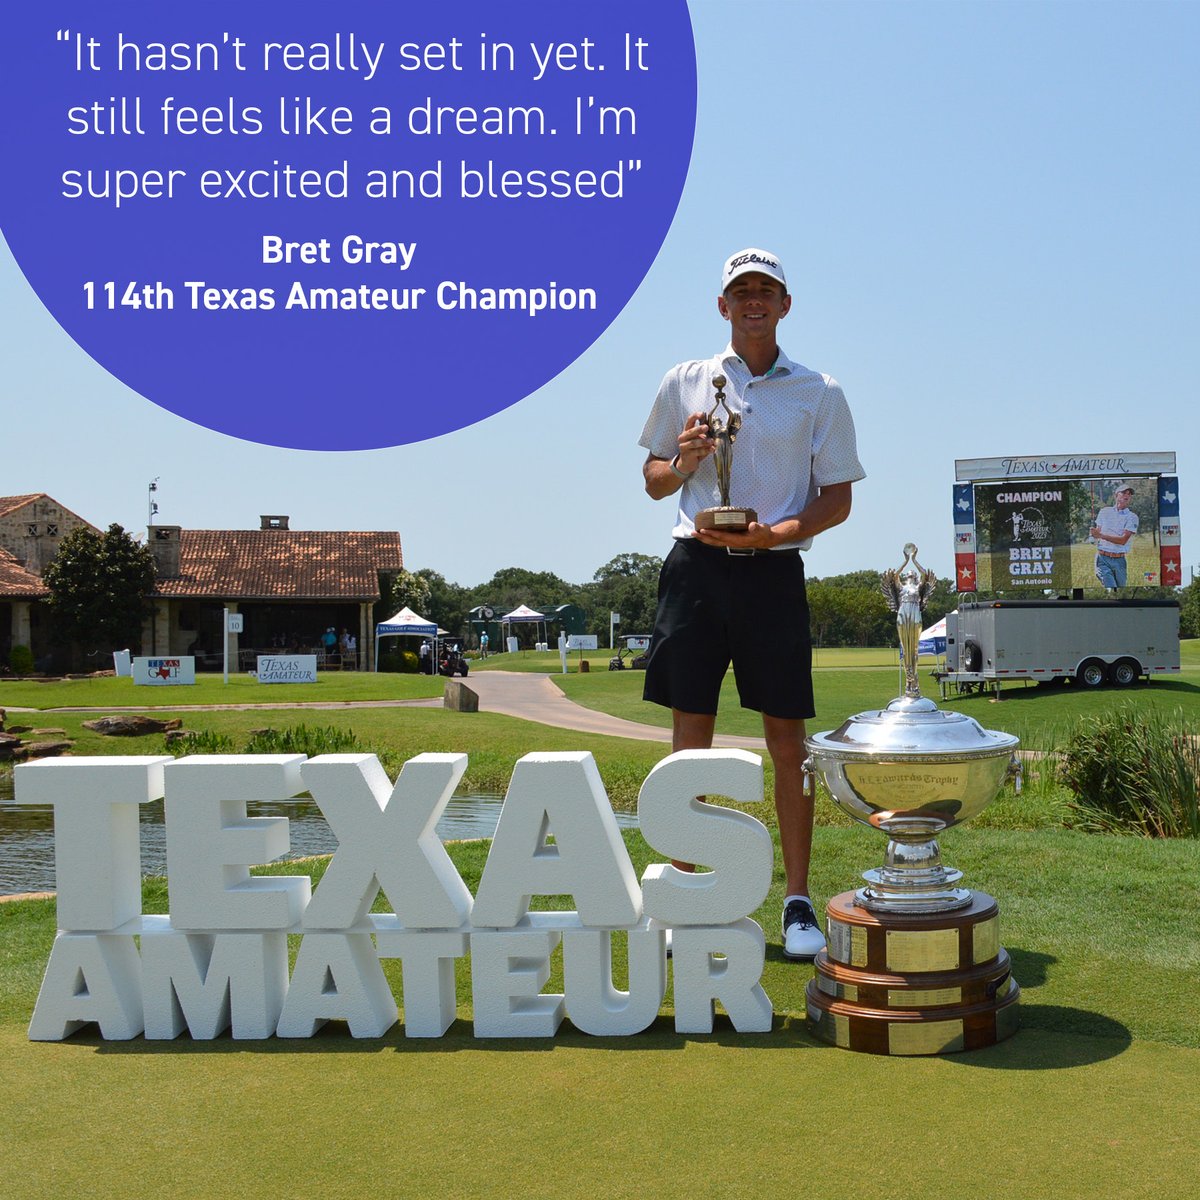 Winning the Texas Amateur might feel like a dream, but you can make it a reality. It all starts with qualifying … and there are just TWO days left to register. Sign up today - bit.ly/3TlN4GK